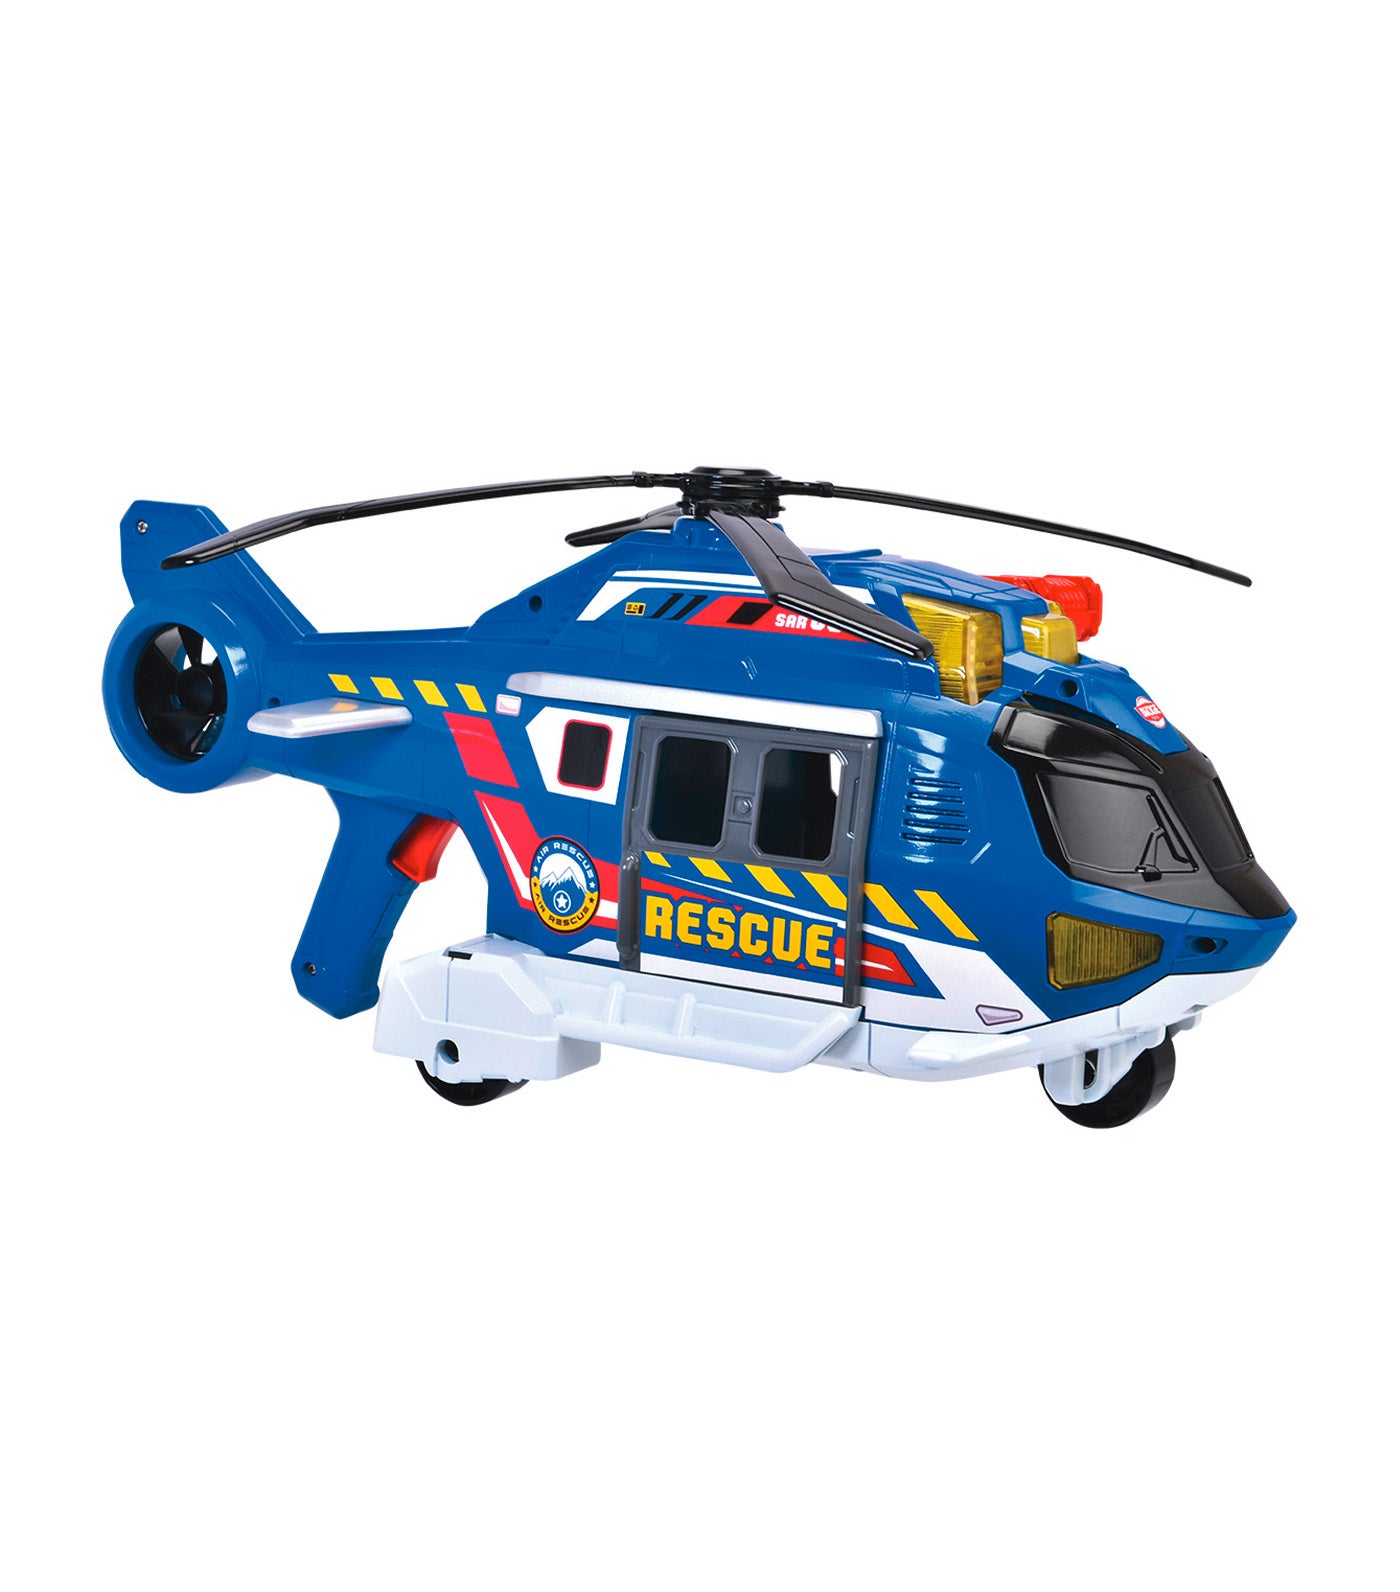 Rescue Helicopter - 39cm